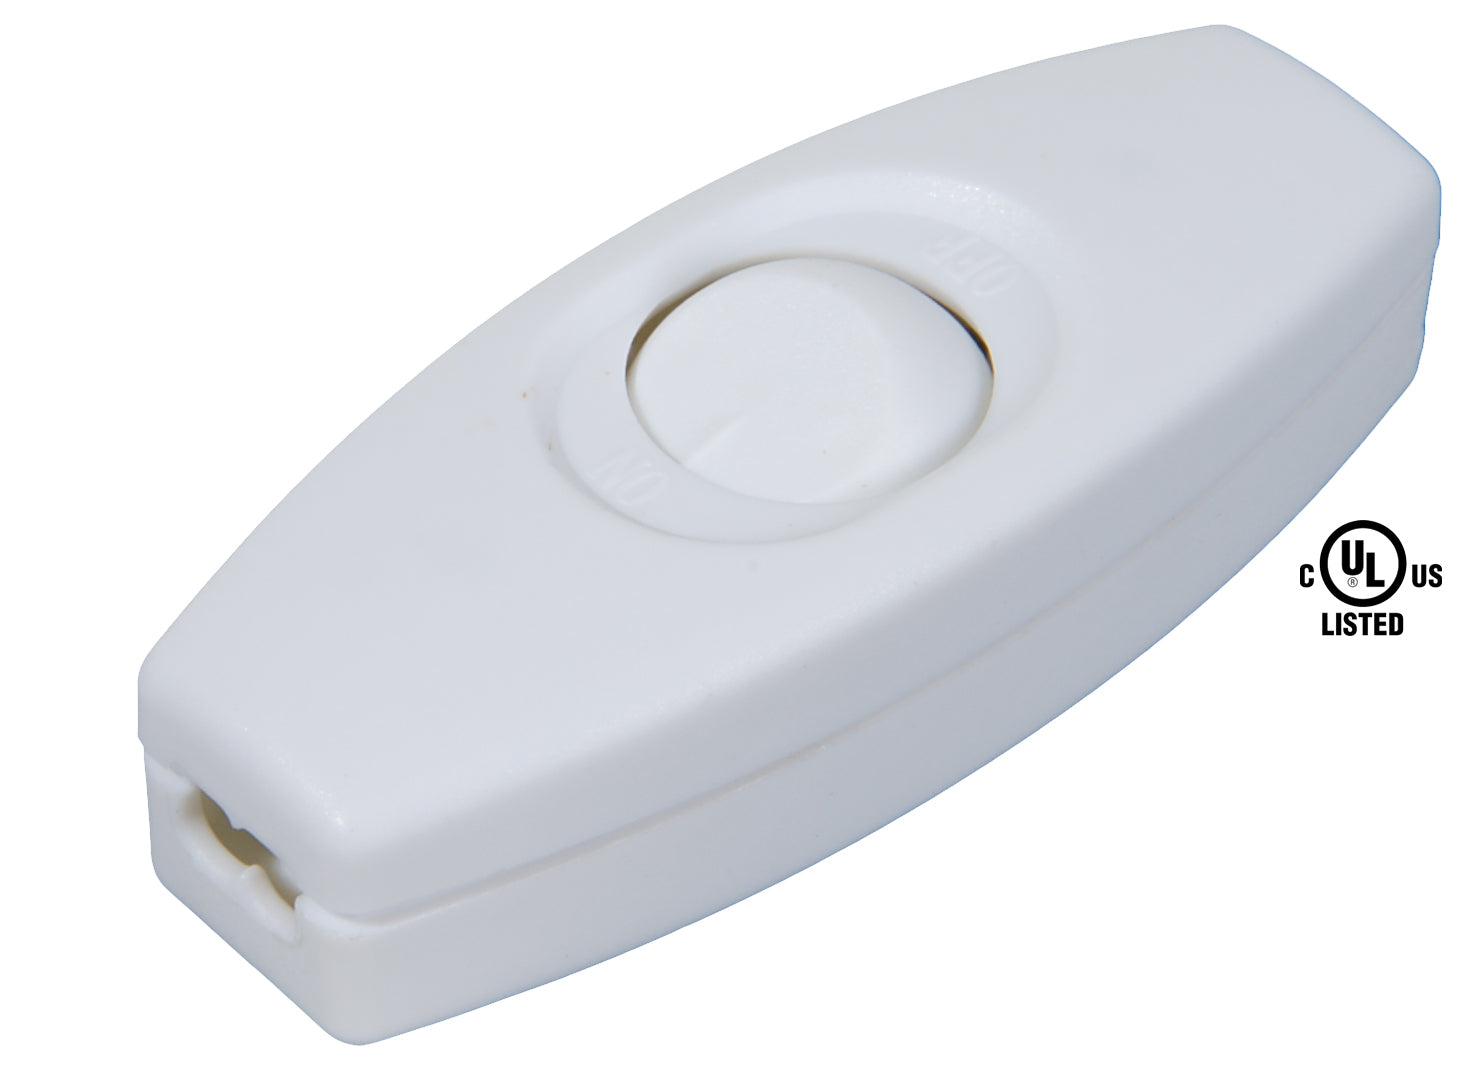 White, Inline ON-OFF Rocker Lamp Cord Switches, Choice to Fit SPT-1 or SPT-2 Lamp Cord